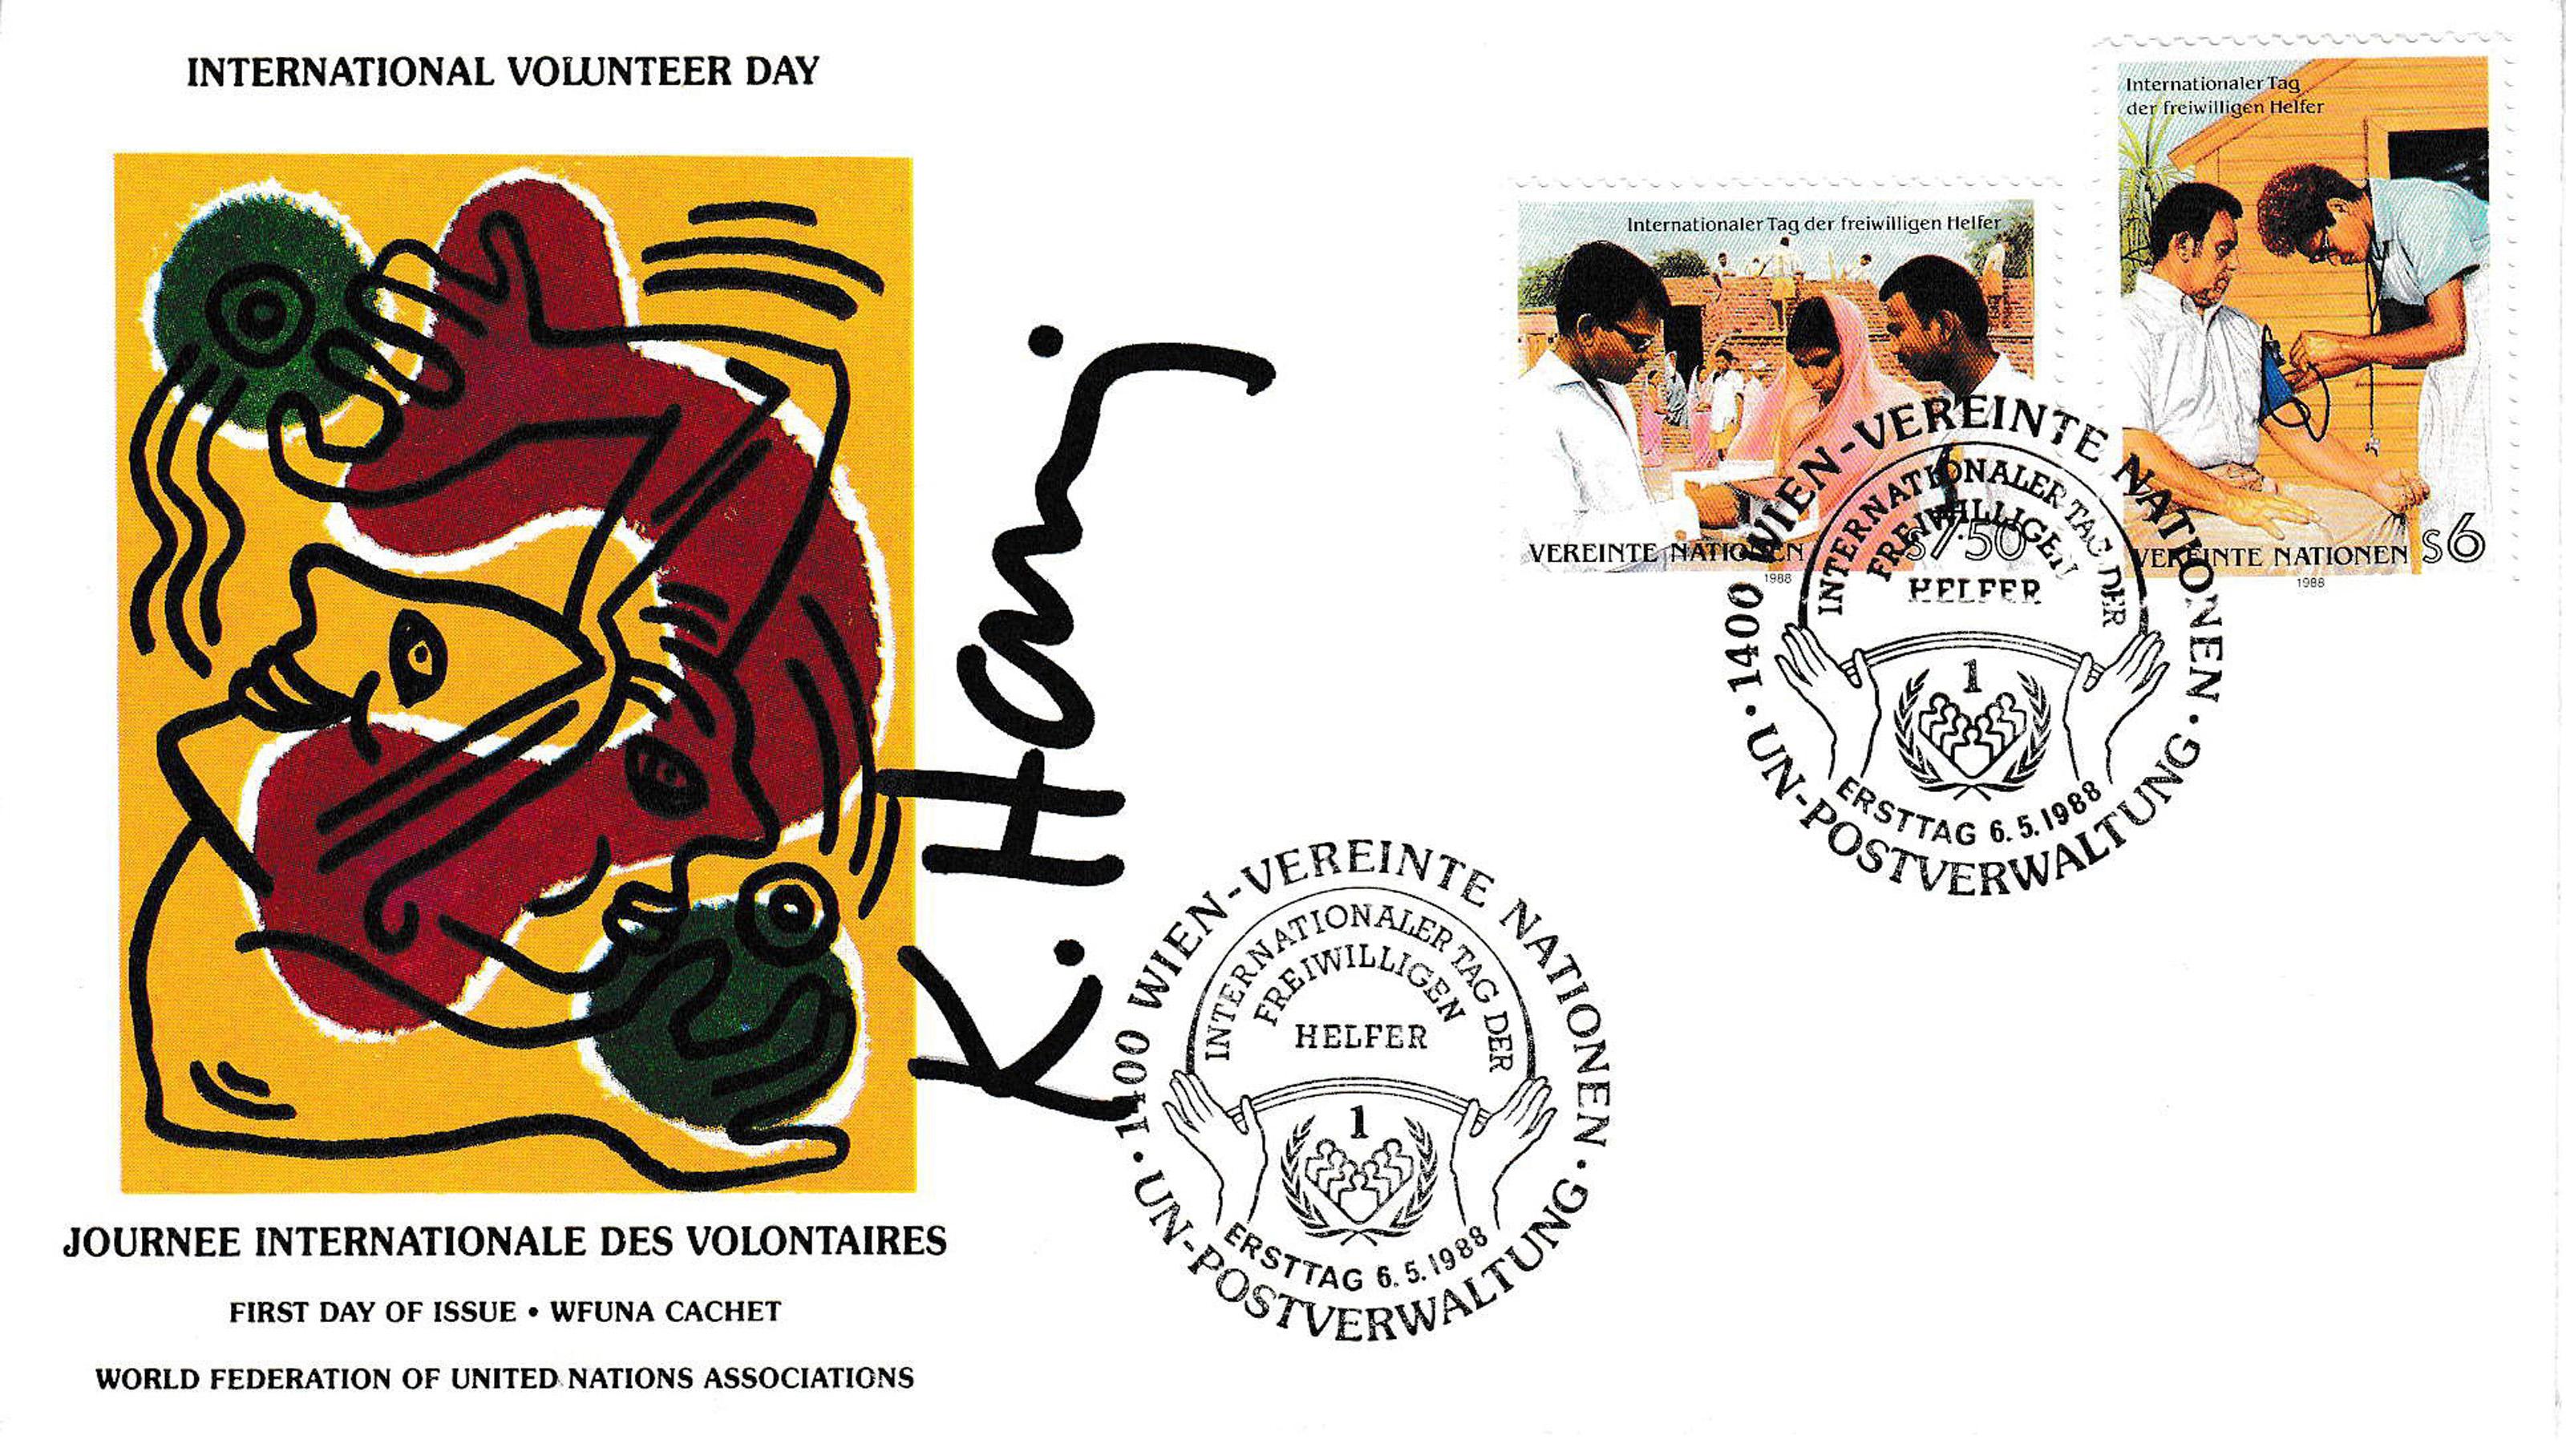 This envelope was produced as part of "International Volunteer Day", a human right's cause created by the World Federation of the United Nations. This mailer includes stamps, the artist’s printed copyright “K. Haring February 27, 1988” on the verso,